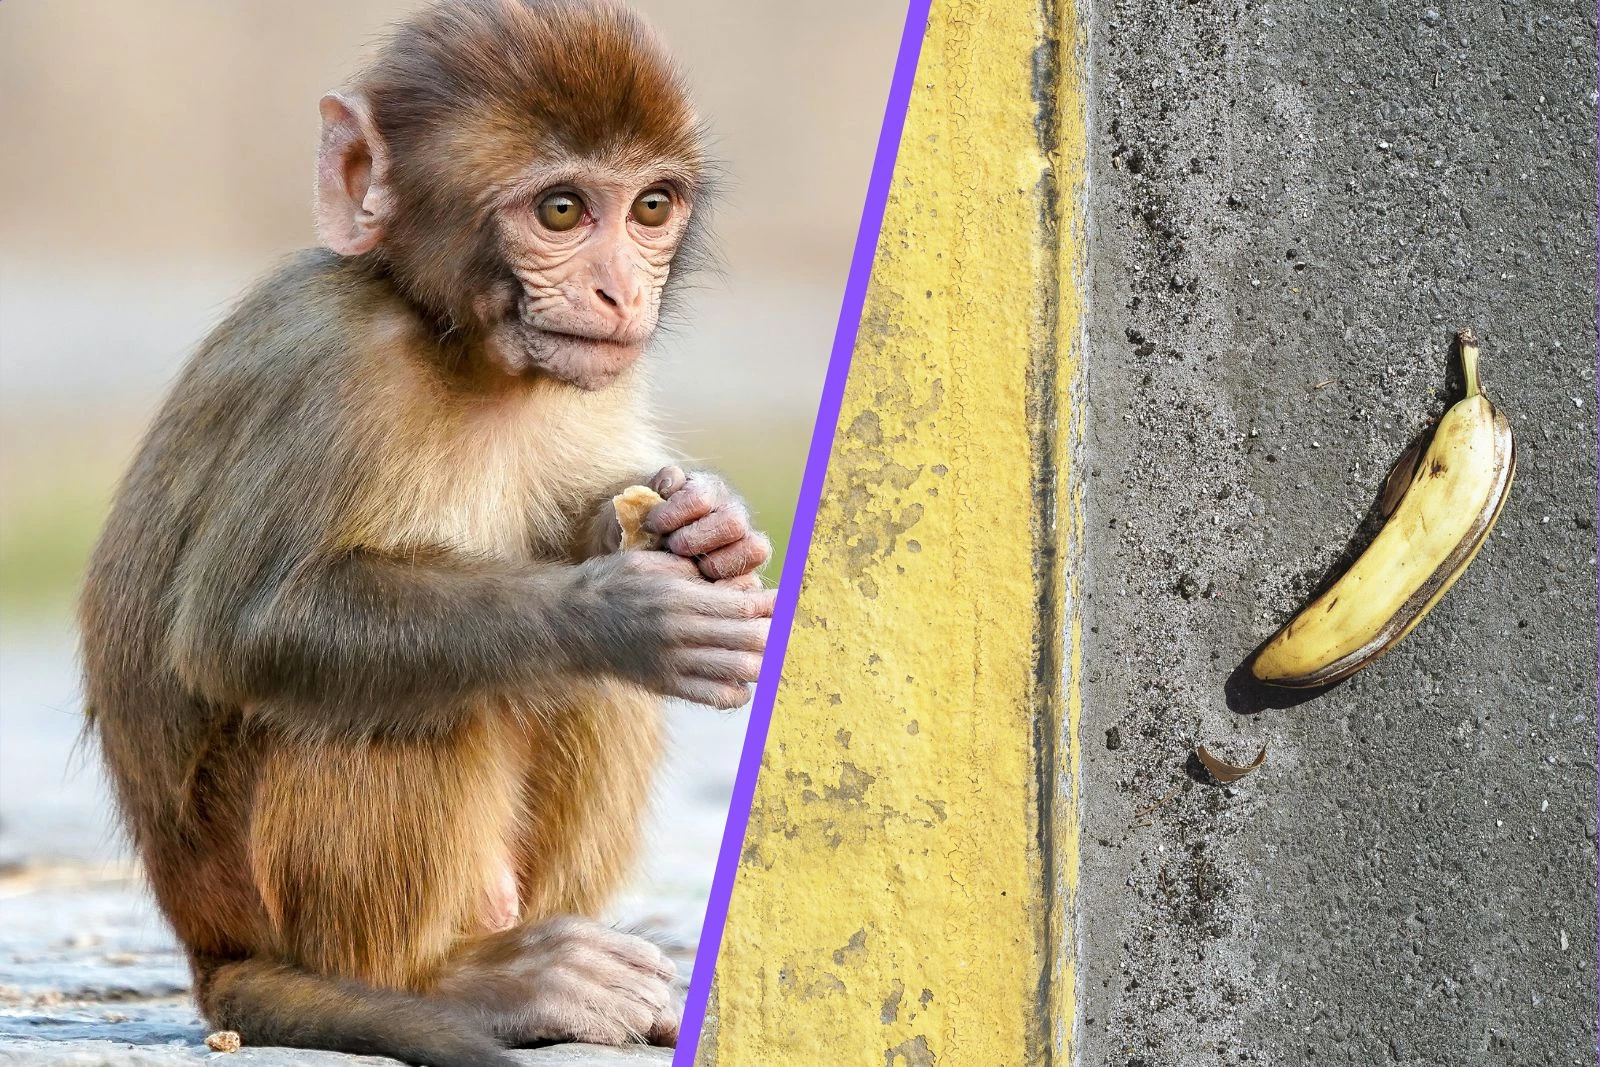 Selfie monkeys' are now endangered because people can't stop eating them